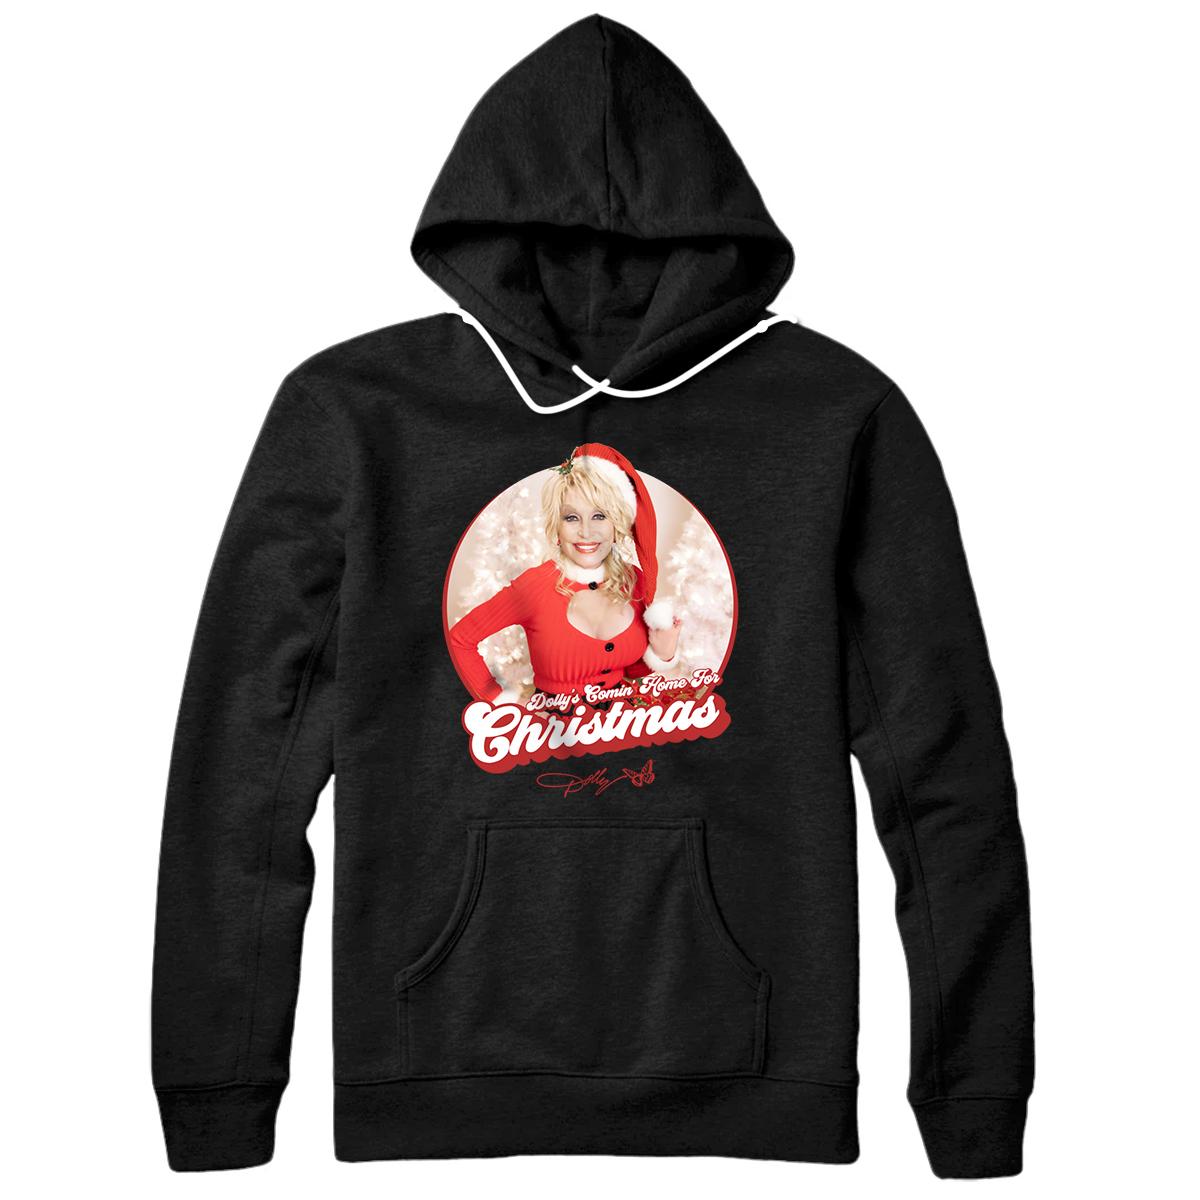 Personalized Dolly Parton's Comin' Home for Christmas Pullover Hoodie